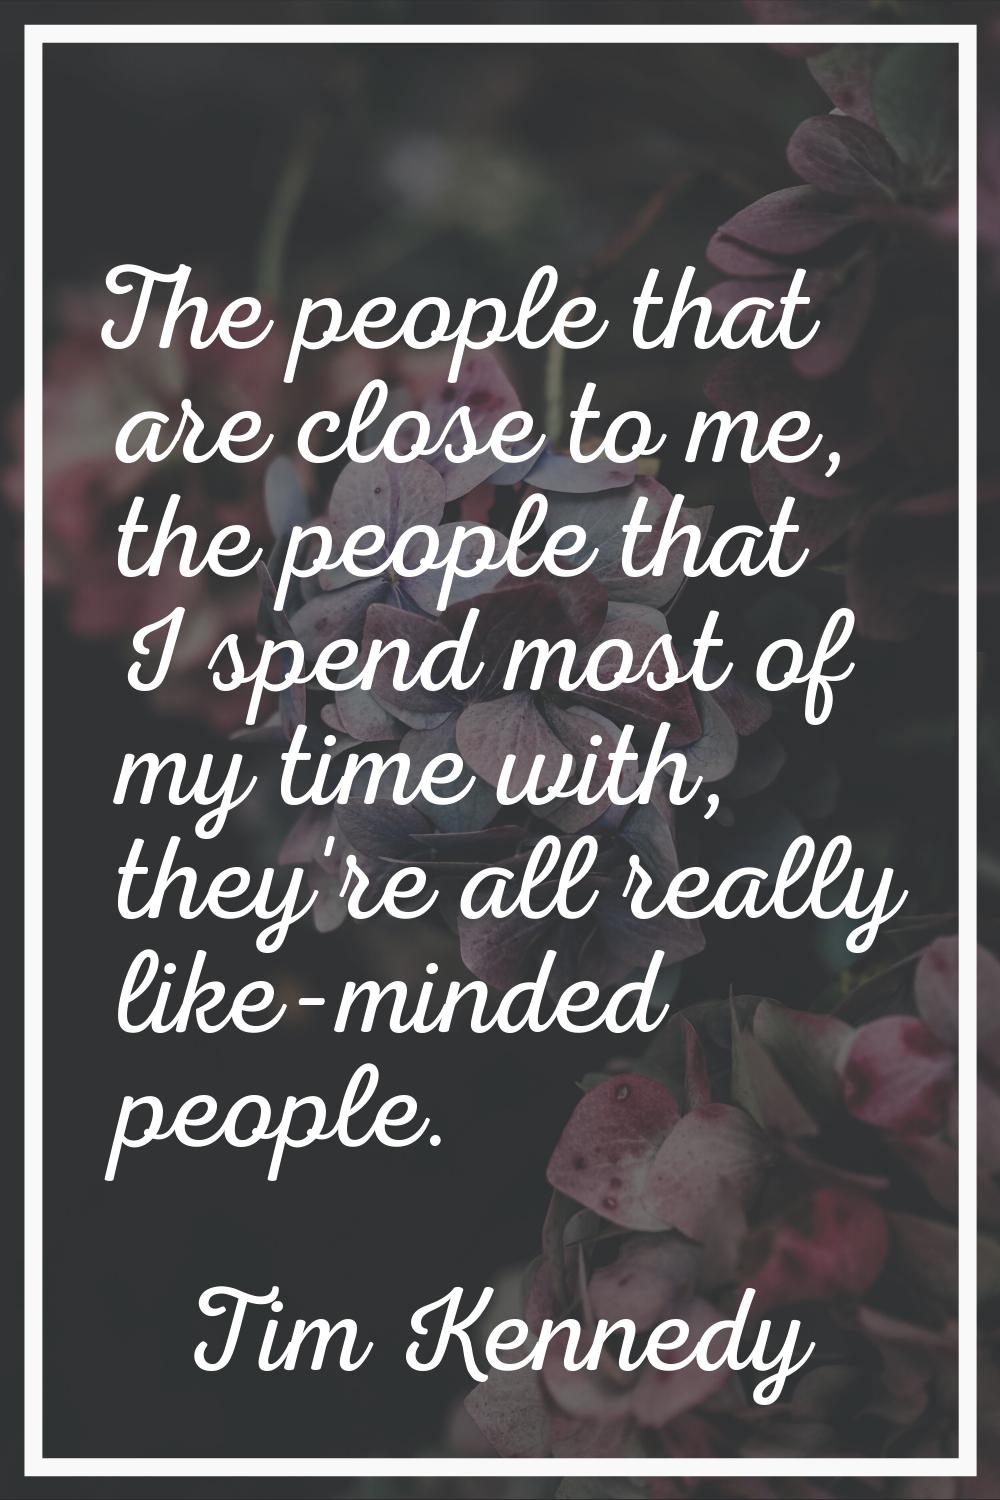 The people that are close to me, the people that I spend most of my time with, they're all really l